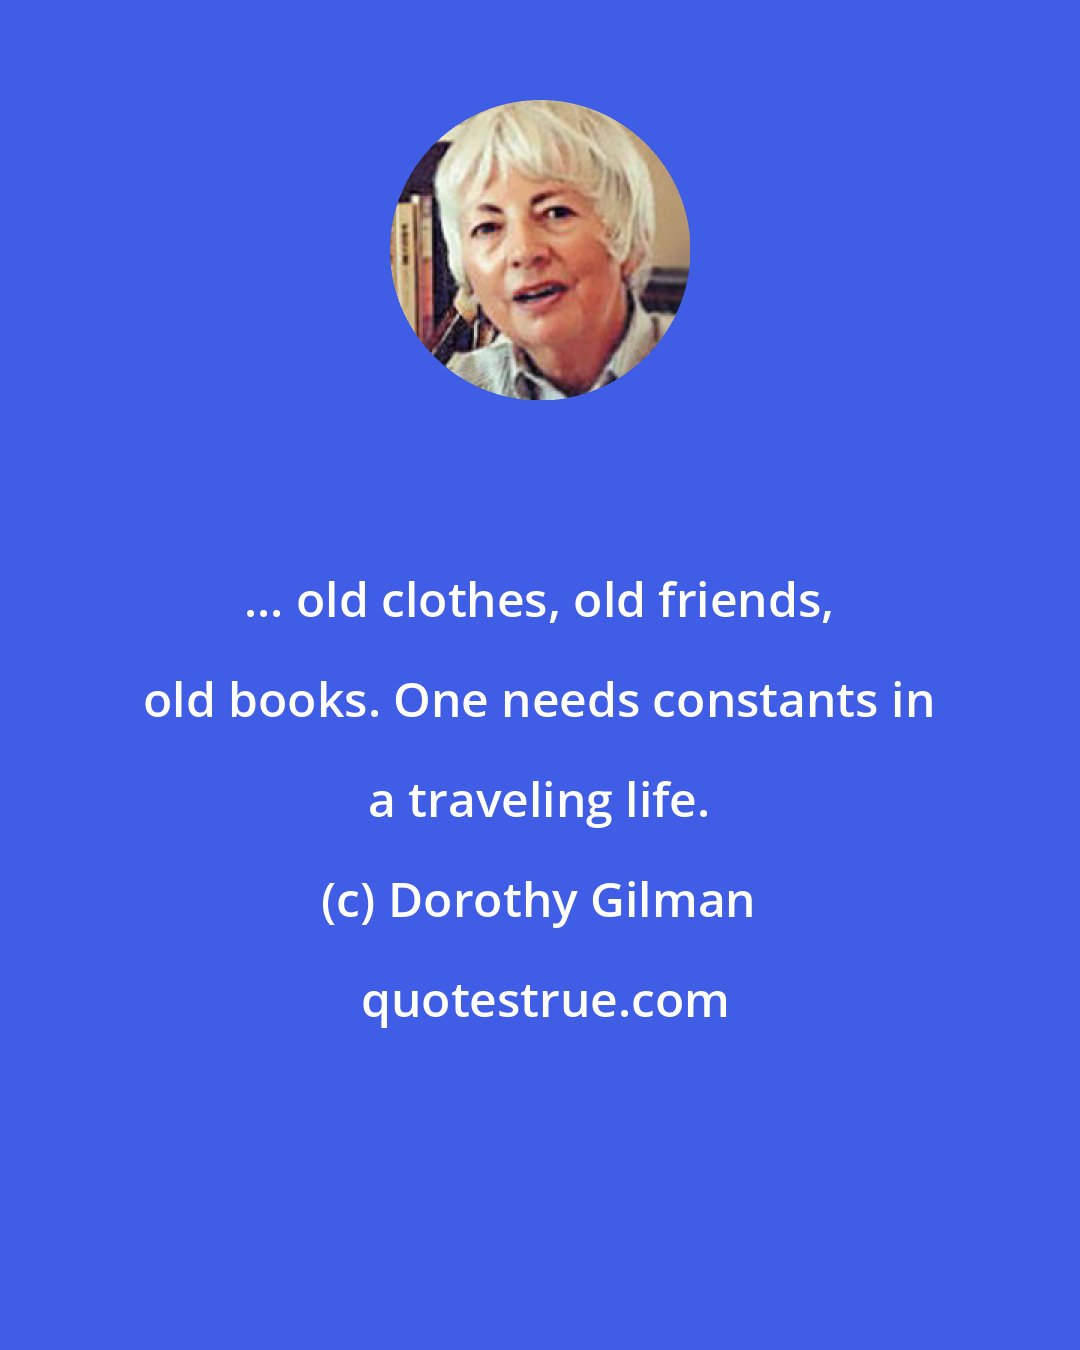 Dorothy Gilman: ... old clothes, old friends, old books. One needs constants in a traveling life.